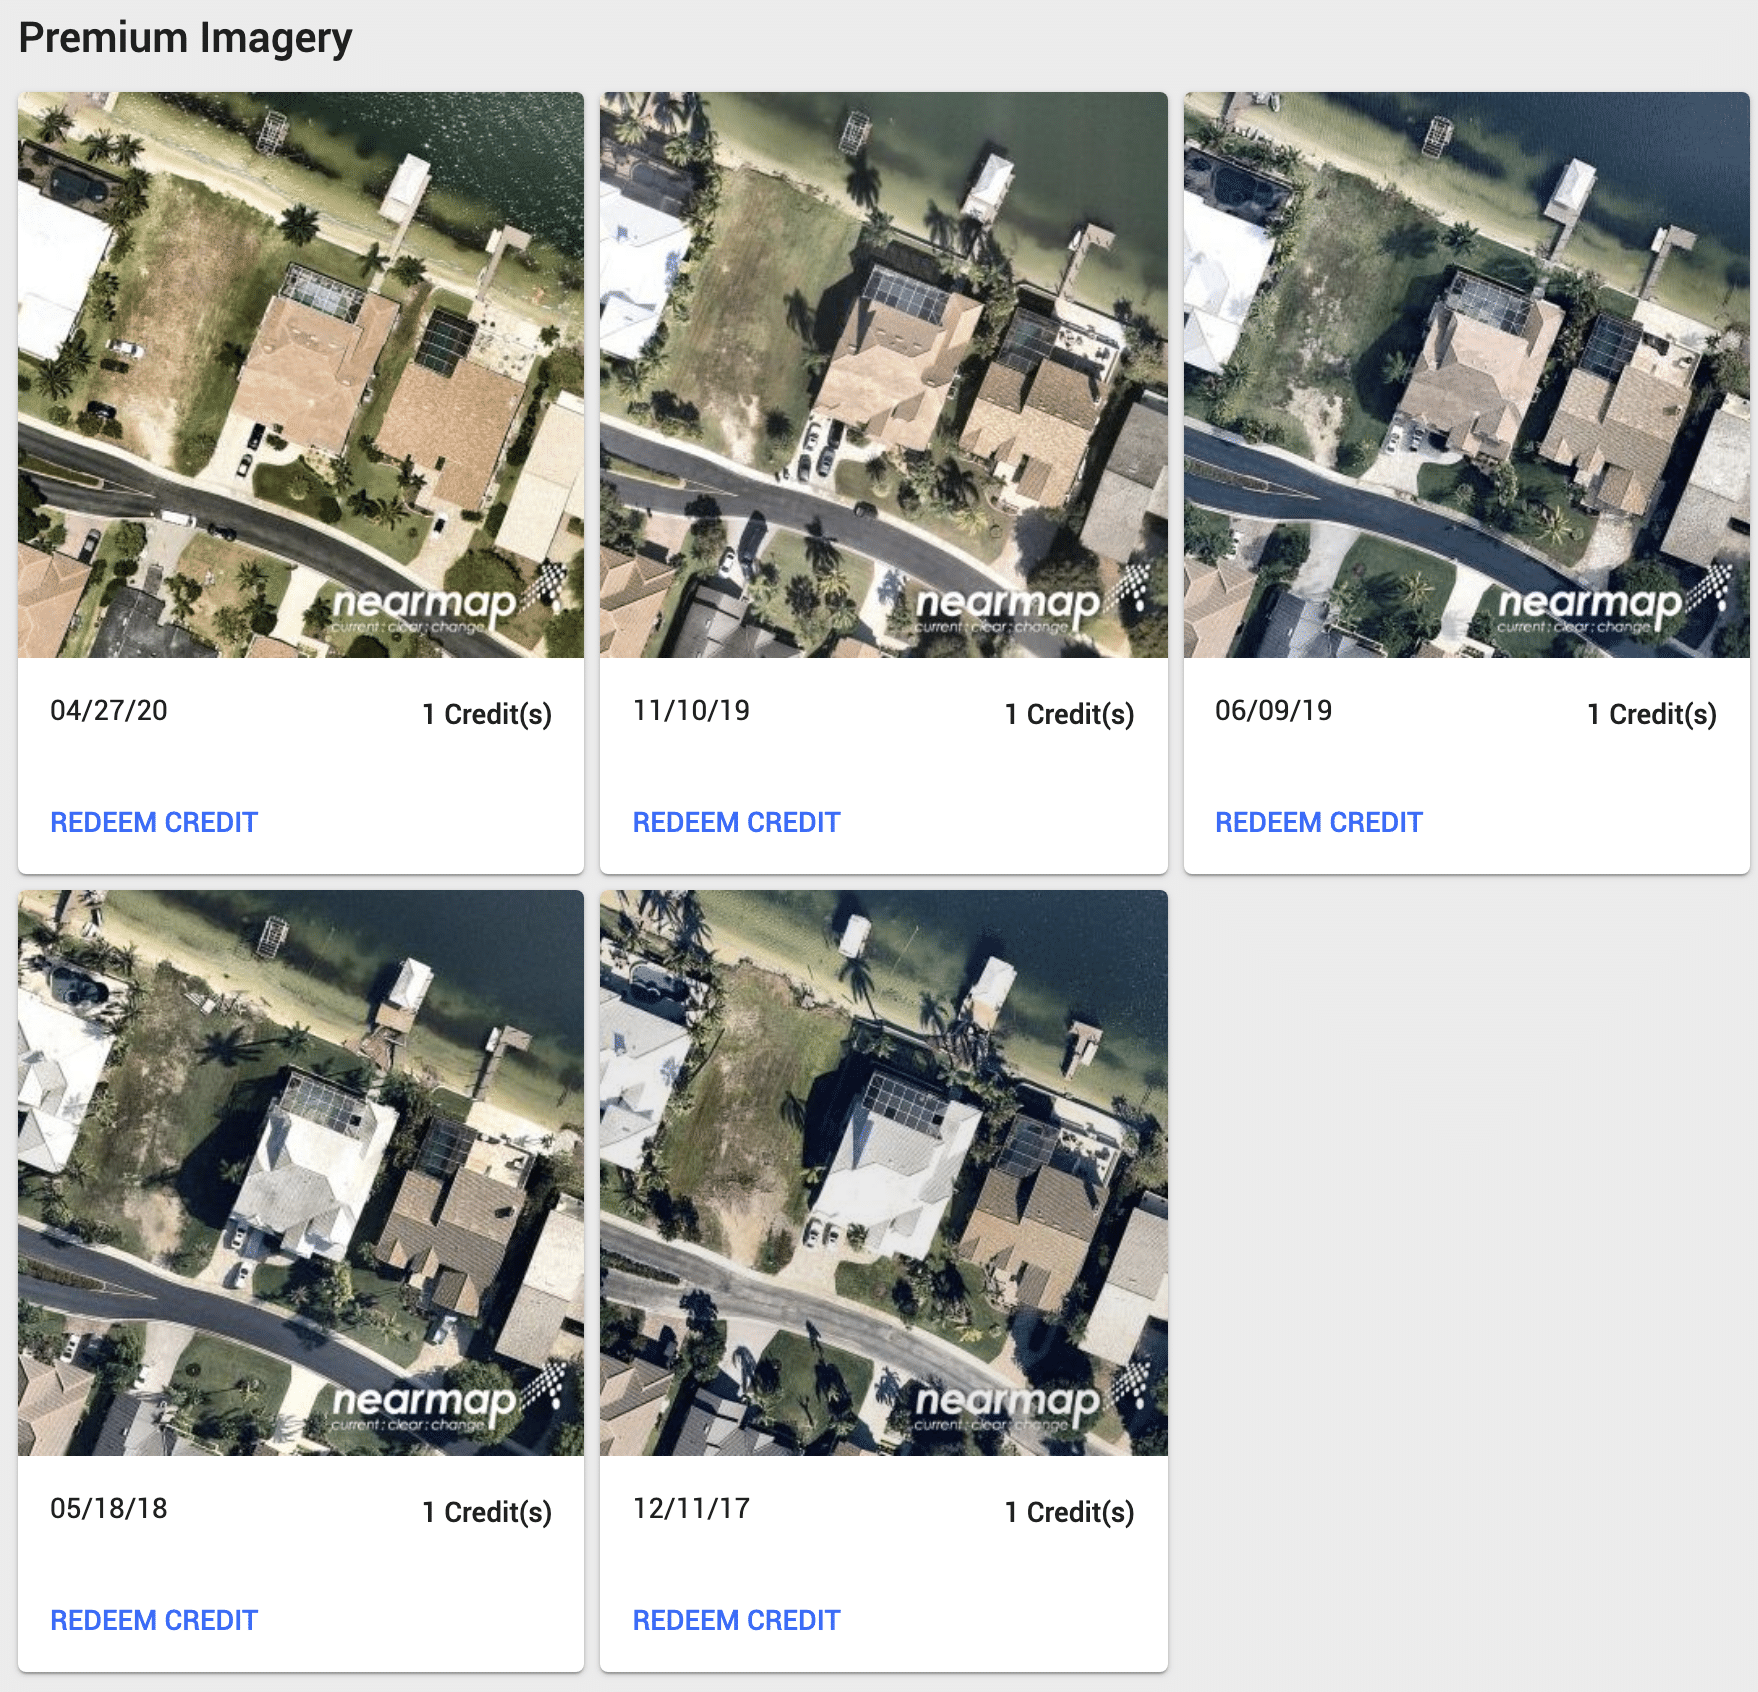 Up-to-date Imagery Options